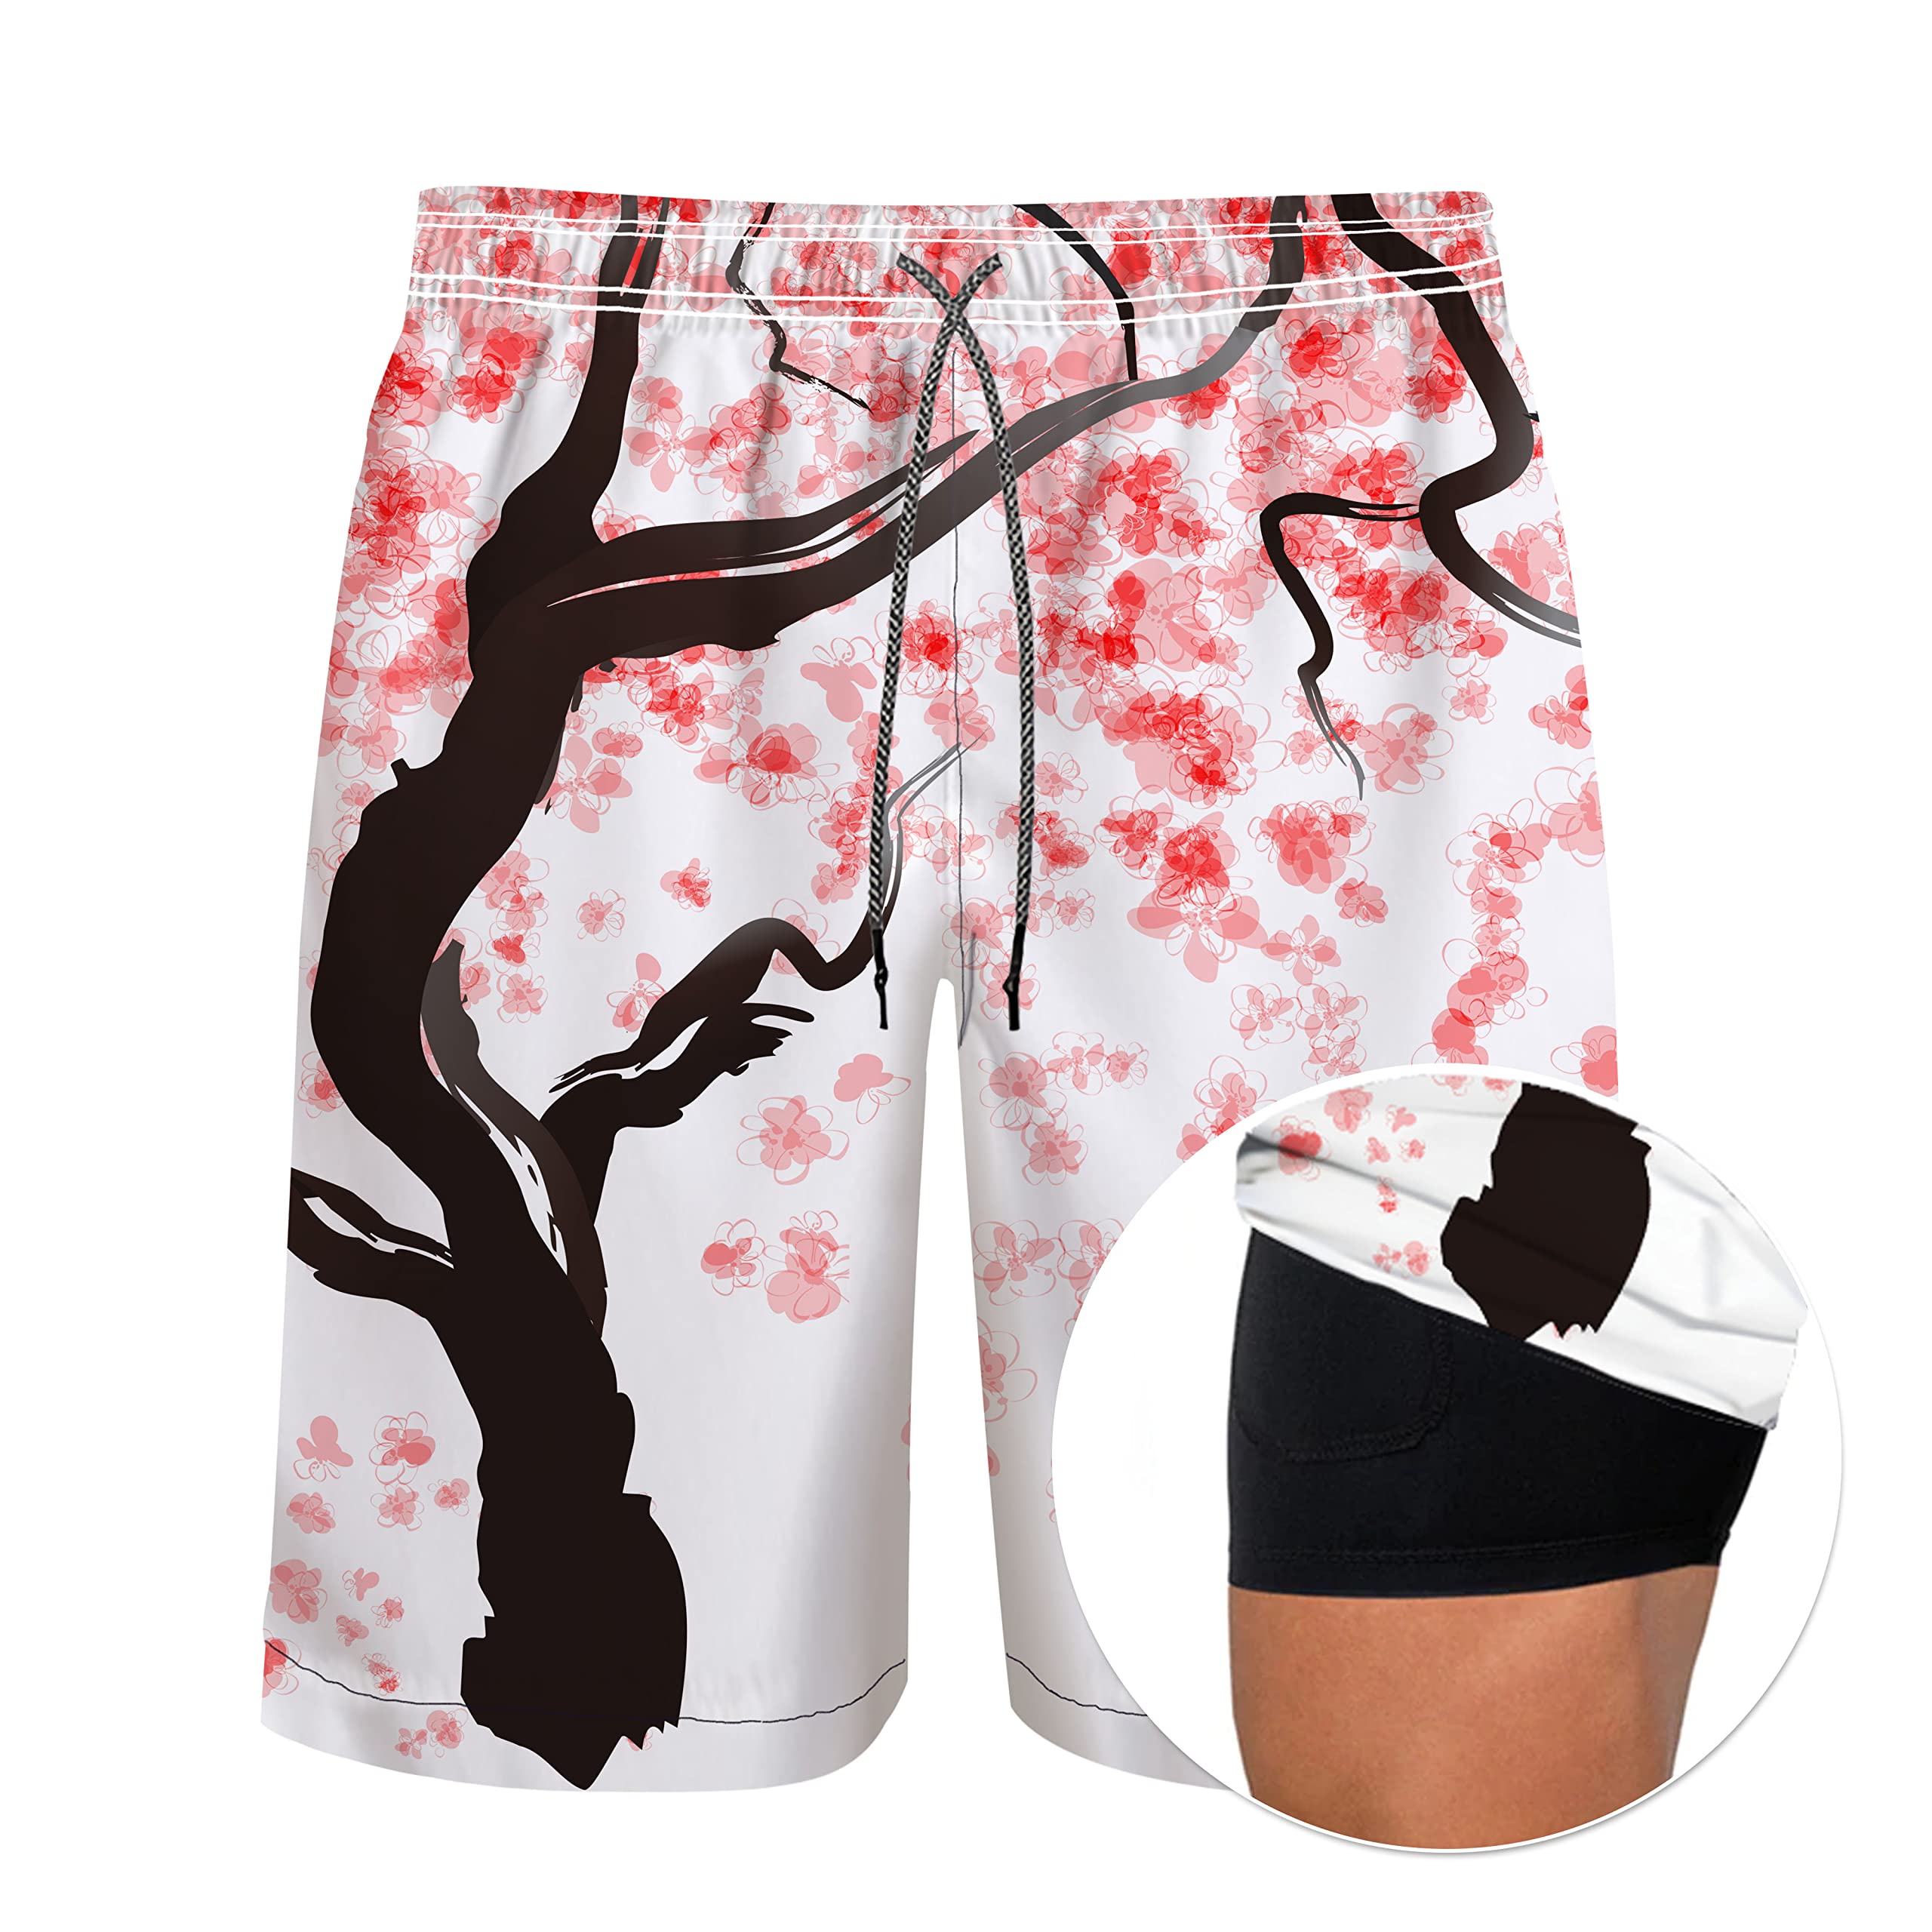 Men's 9" Inseam Swim Trunks With Compression Liner Quick Dry Swim Bathing Suit - Cherry Blossoms